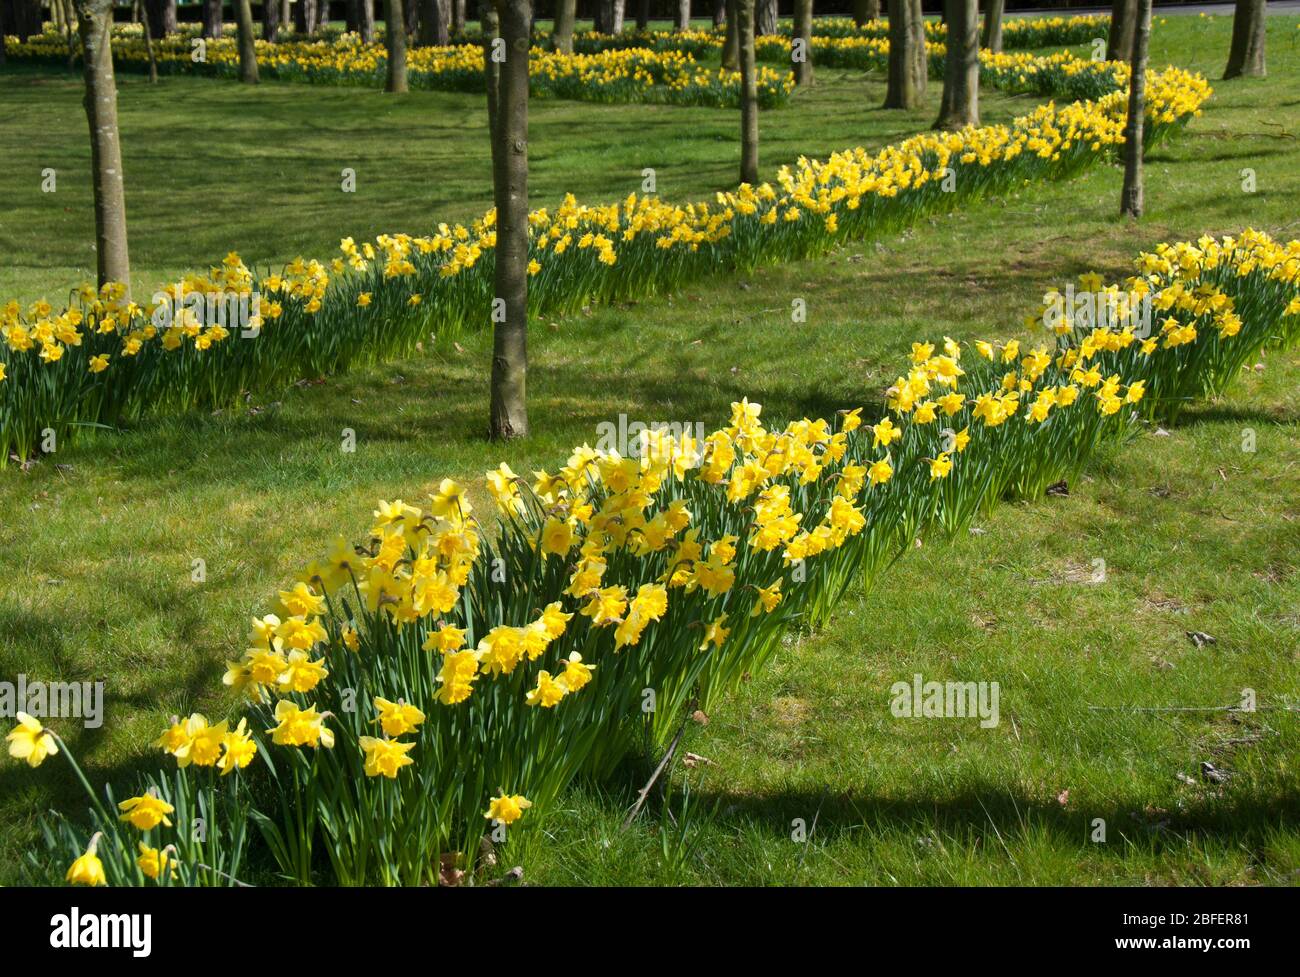 Daffodils in serried ranks on the approach to RAF Cranwell Stock Photo